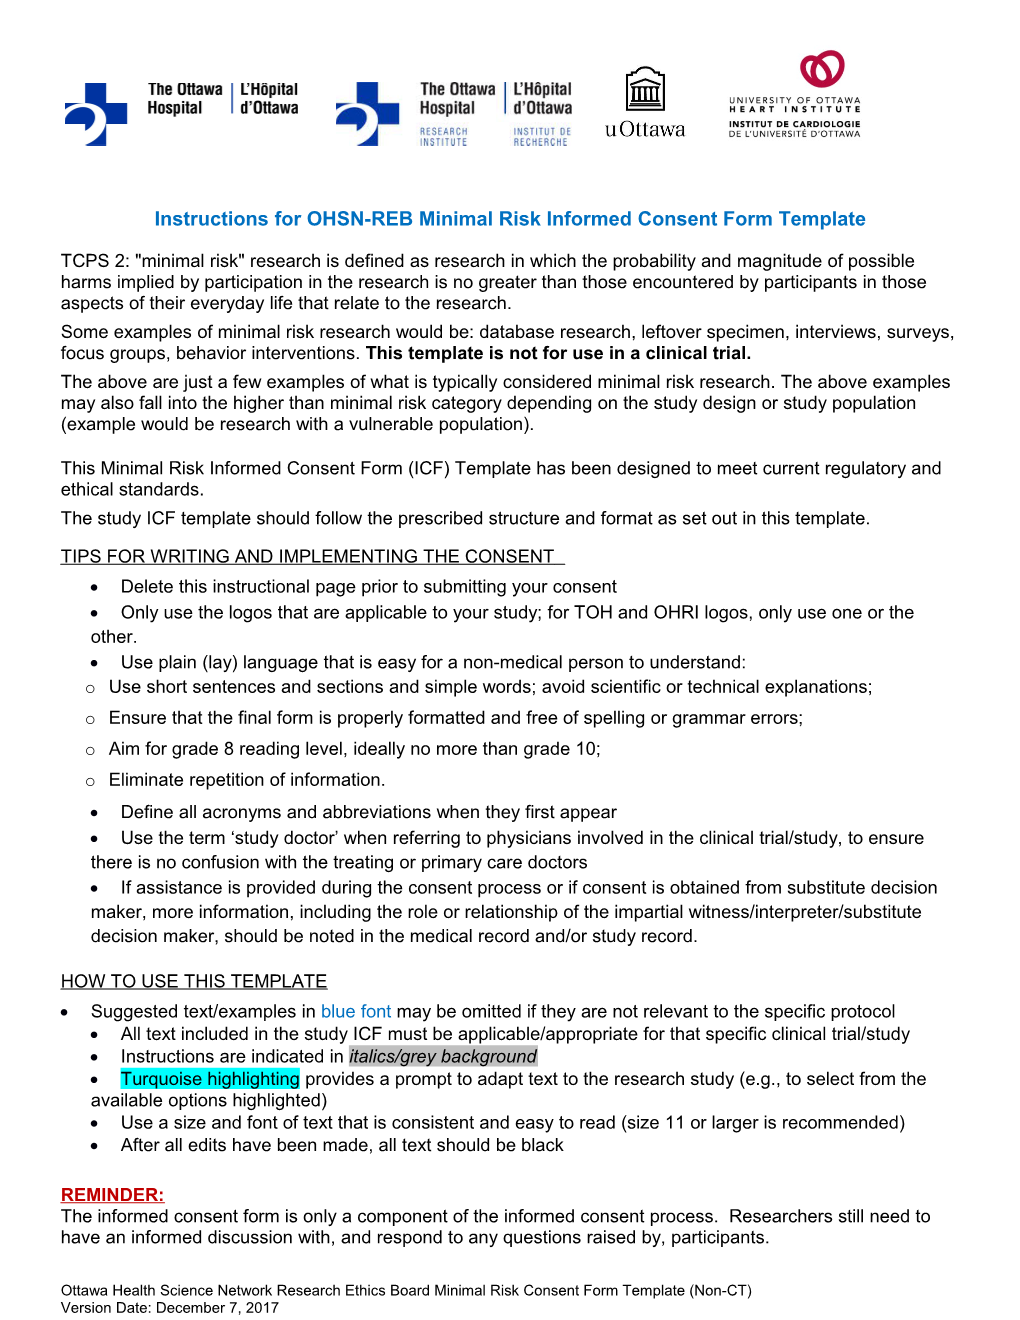 Instructions for OHSN-REB Minimal Risk Informed Consent Form Template